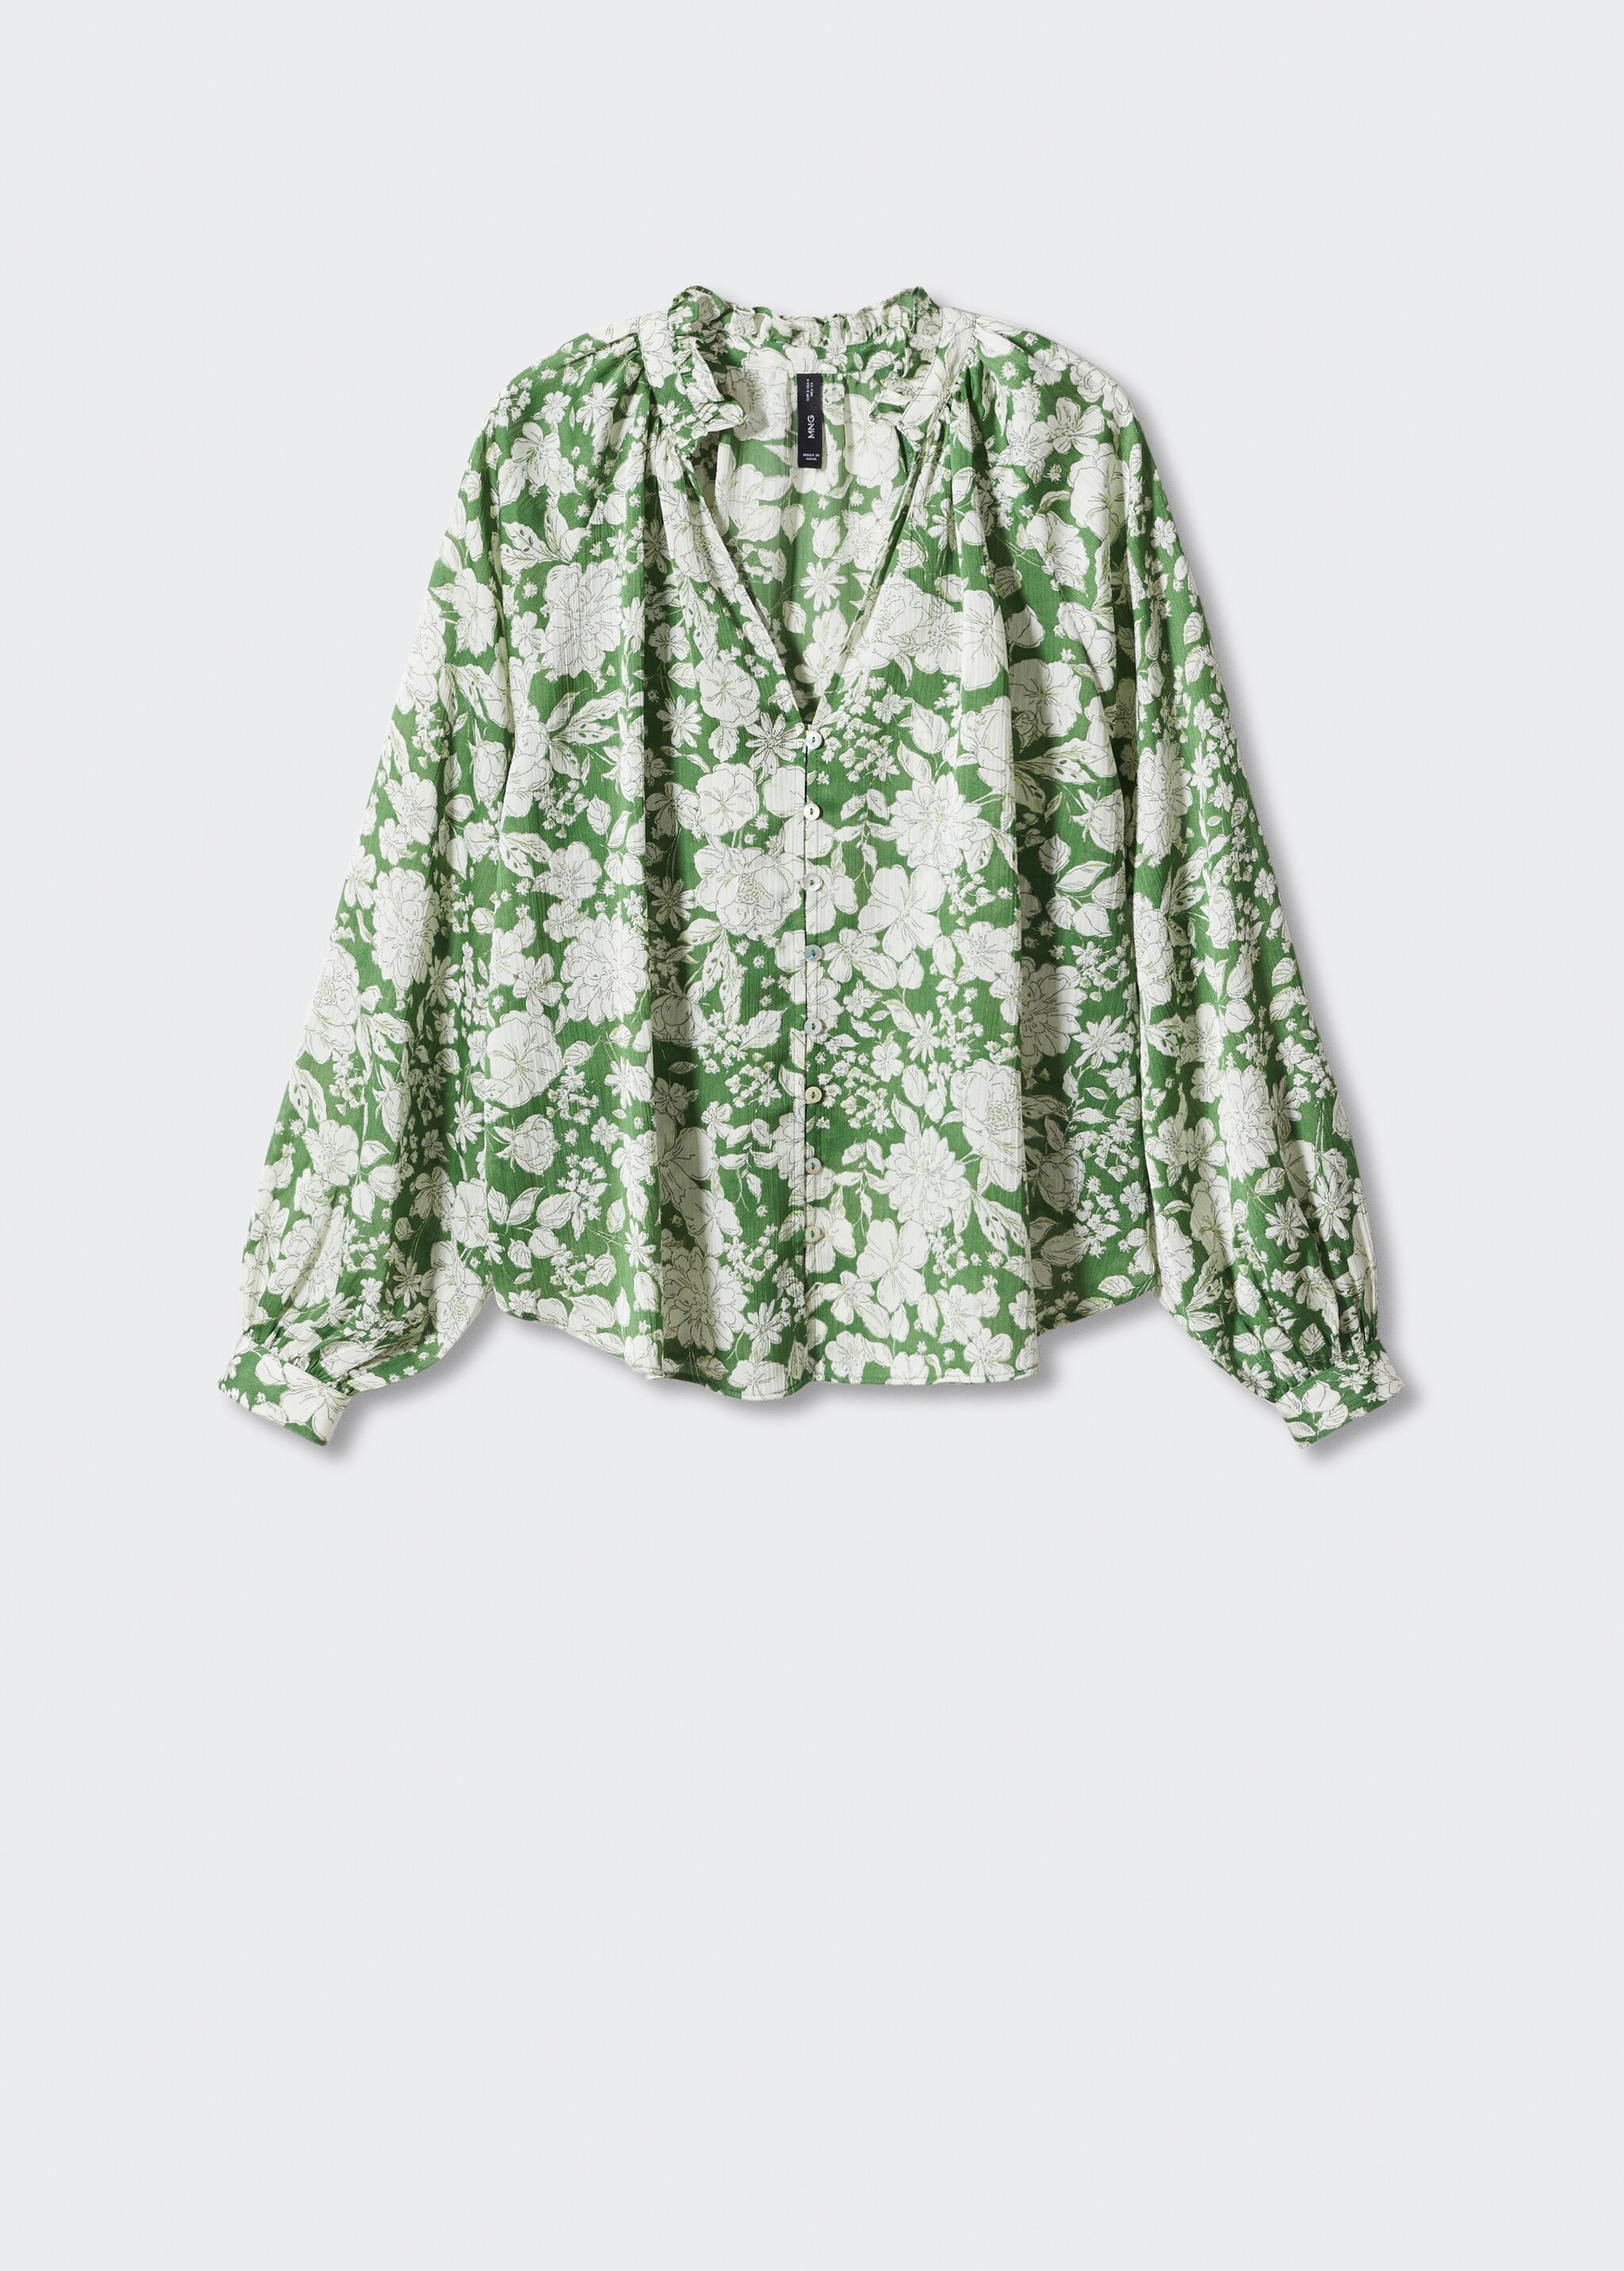 Buttoned floral blouse - Article without model